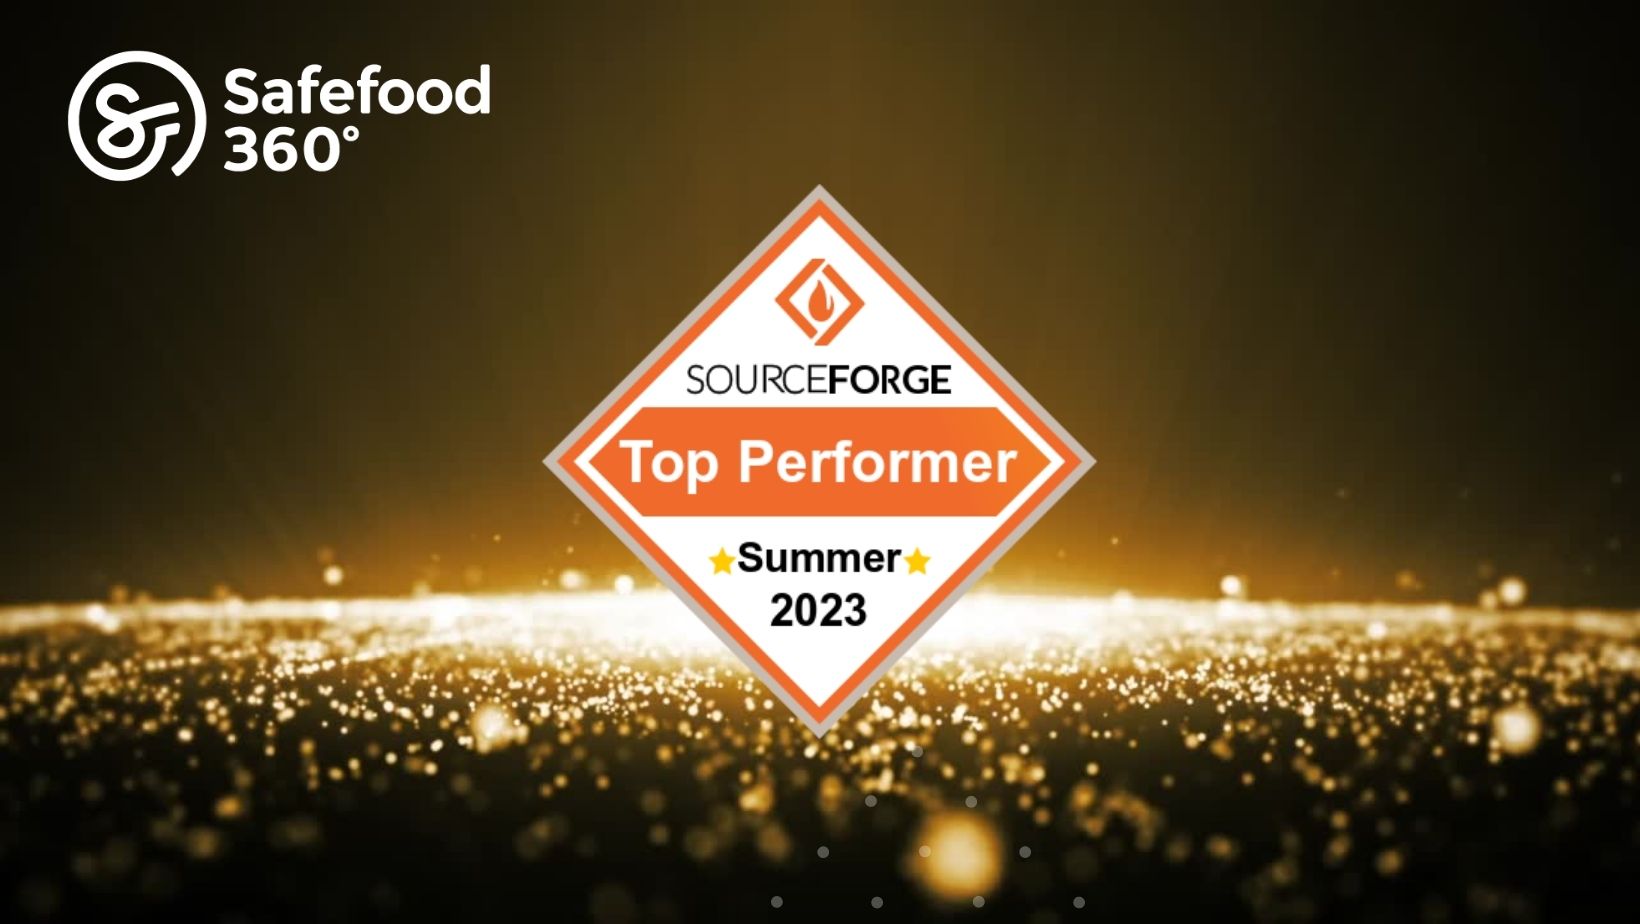 Safefood 360 is now top performer on sourceforge